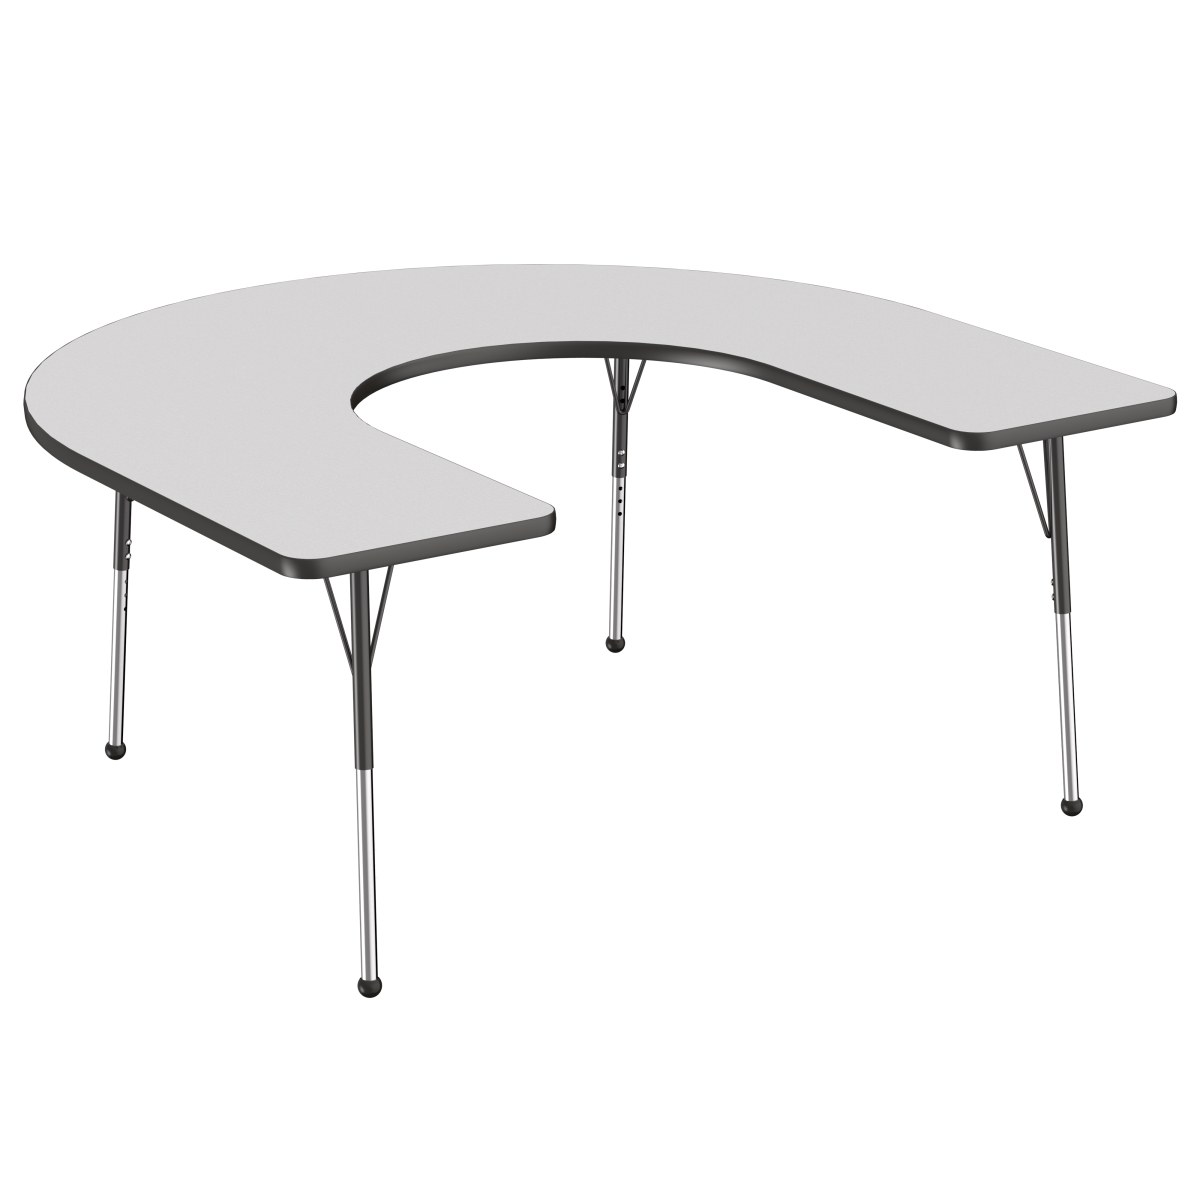 10094-gybk 60 X 66 In. Horseshoe T-mold Adjustable Activity Table With Standard Ball - Grey & Black